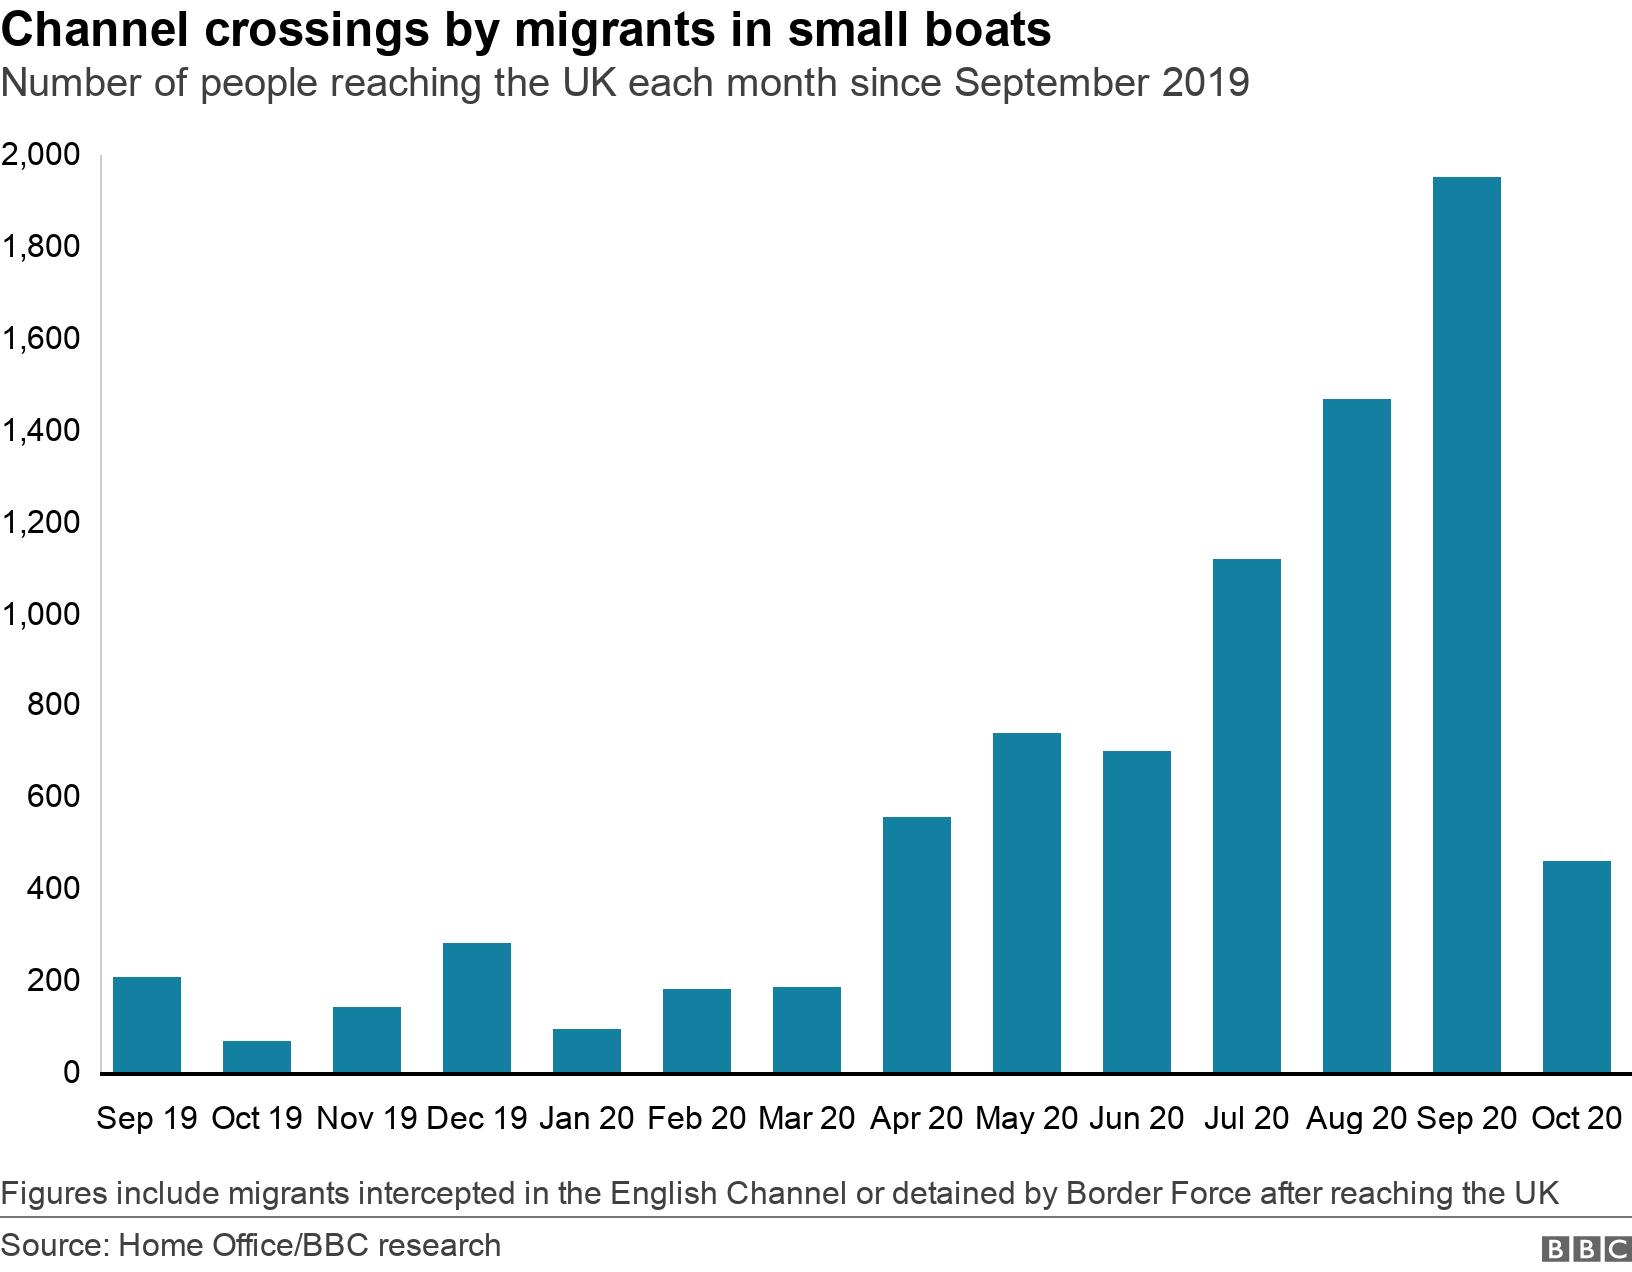 Channel crossings by migrants in small boats. Number of people reaching the UK each month since September 2019.  Figures include migrants intercepted in the English Channel or detained by Border Force after reaching the UK.